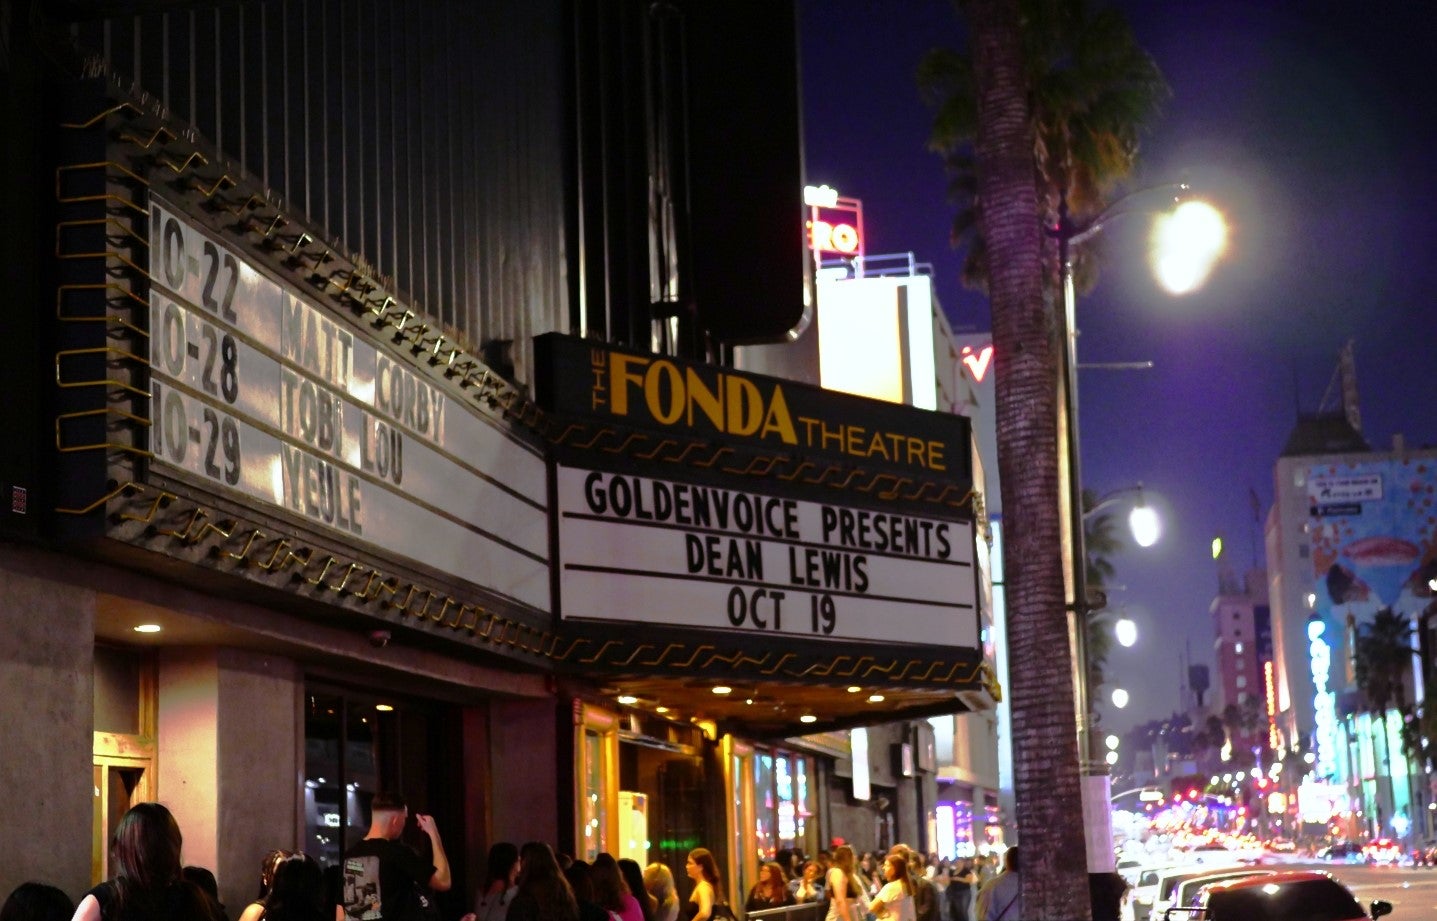 sign on Fonda Theatre at night reads Dean Lewis as fans line up below